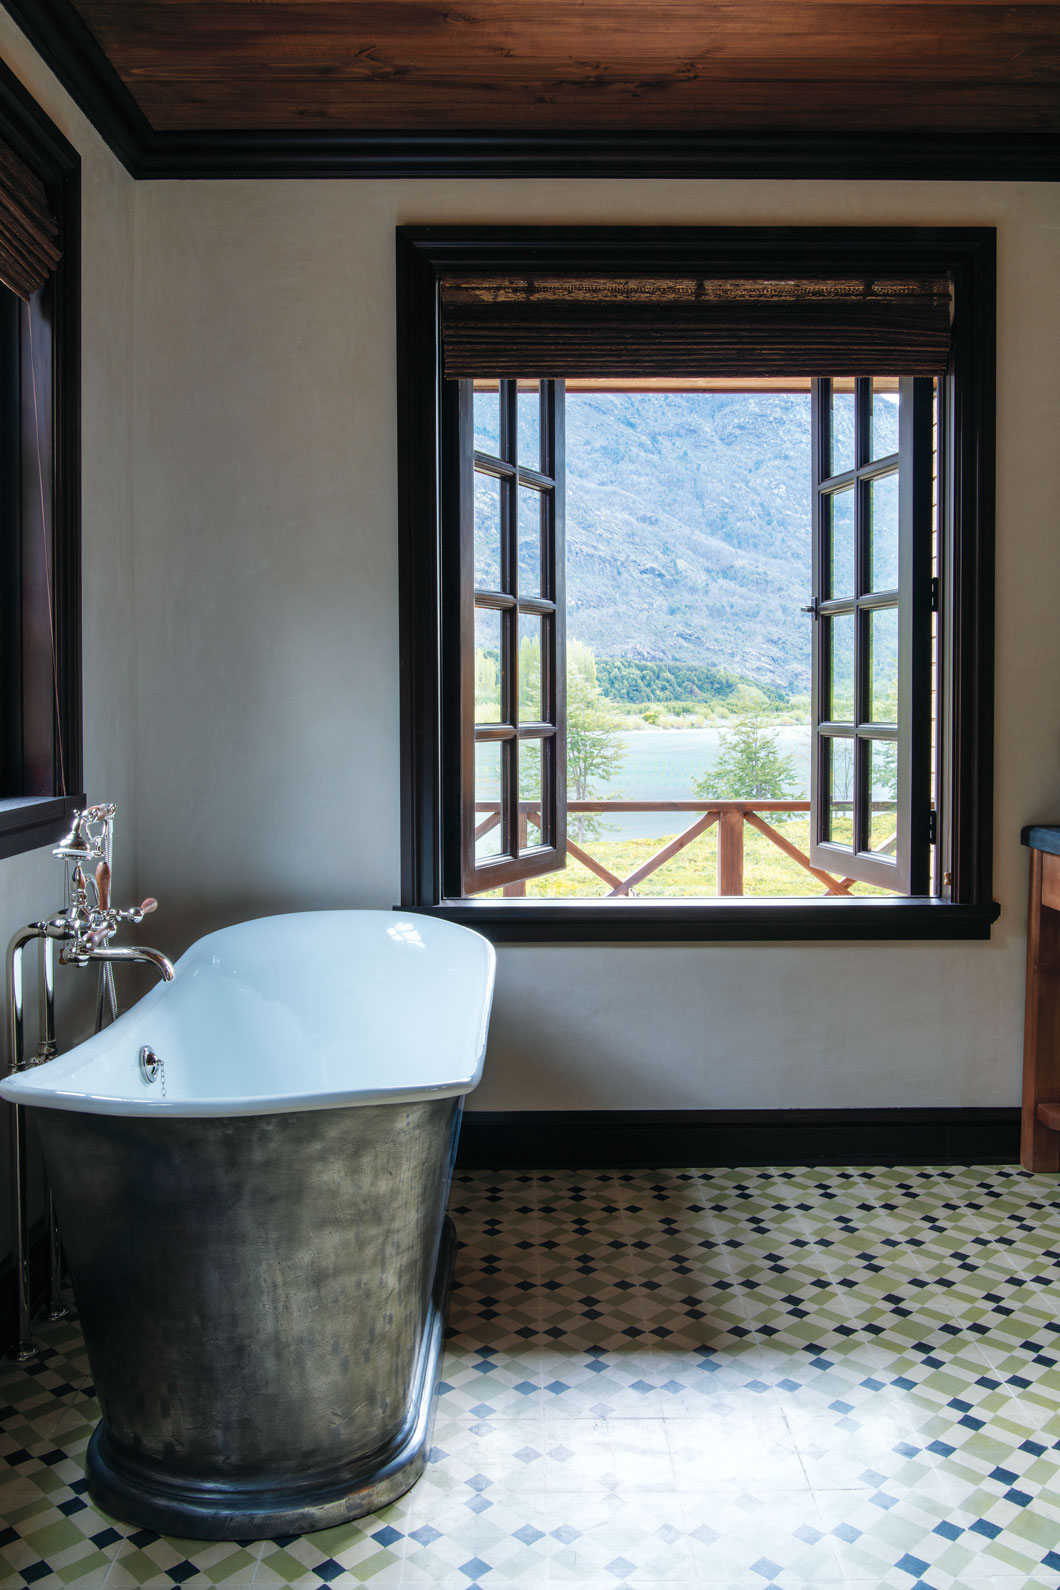 A bathtub in a bathroom with a view out to lush scenery. 